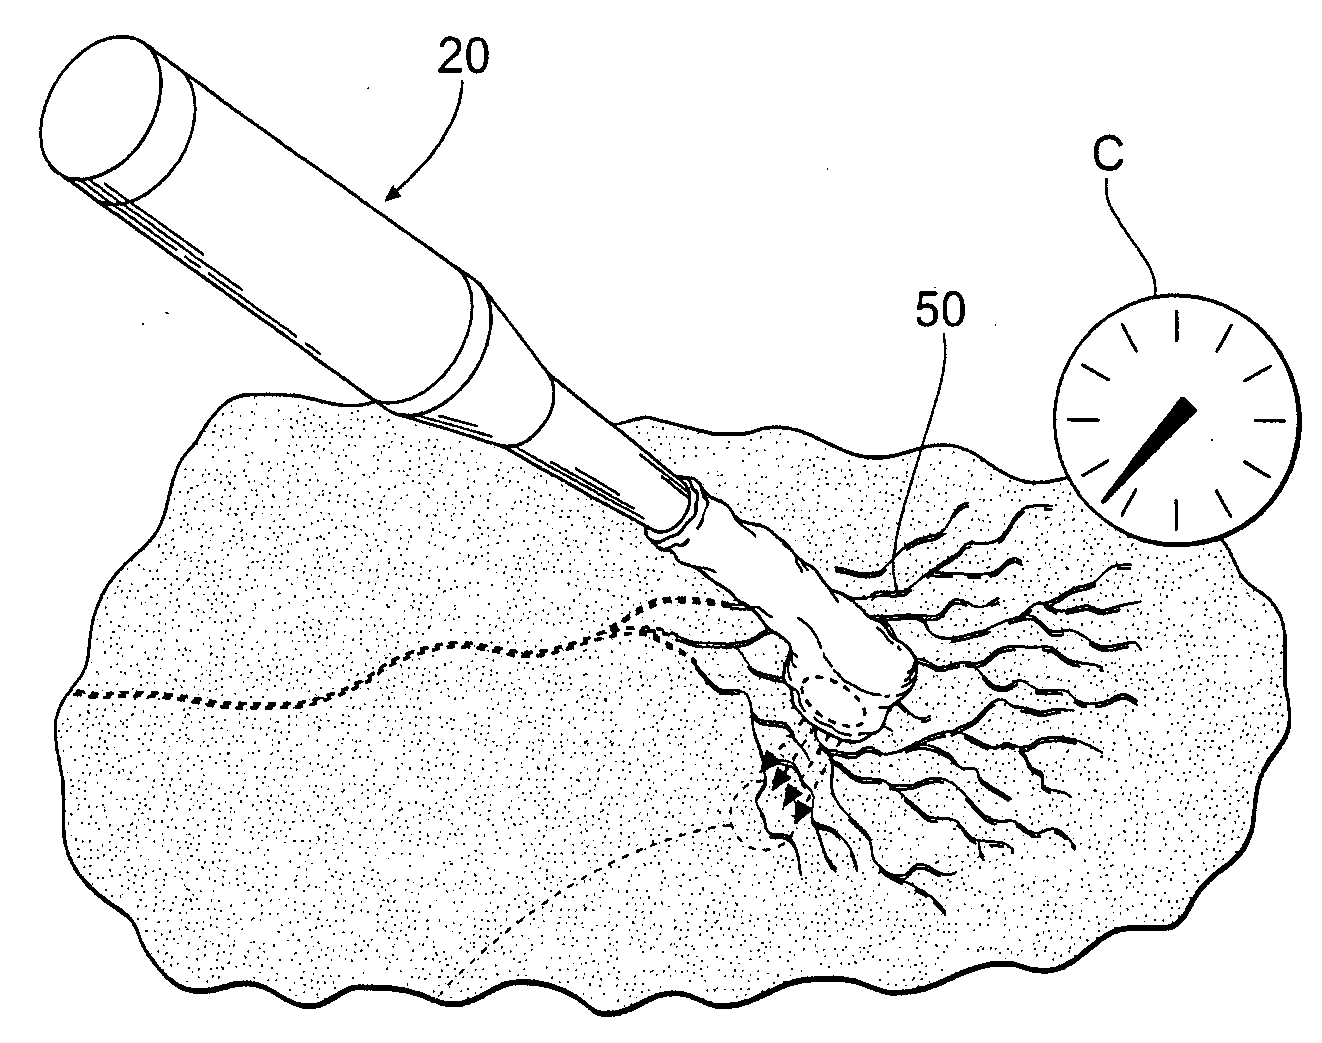 Systems and methods for treating superficial venous malformations like spider veins